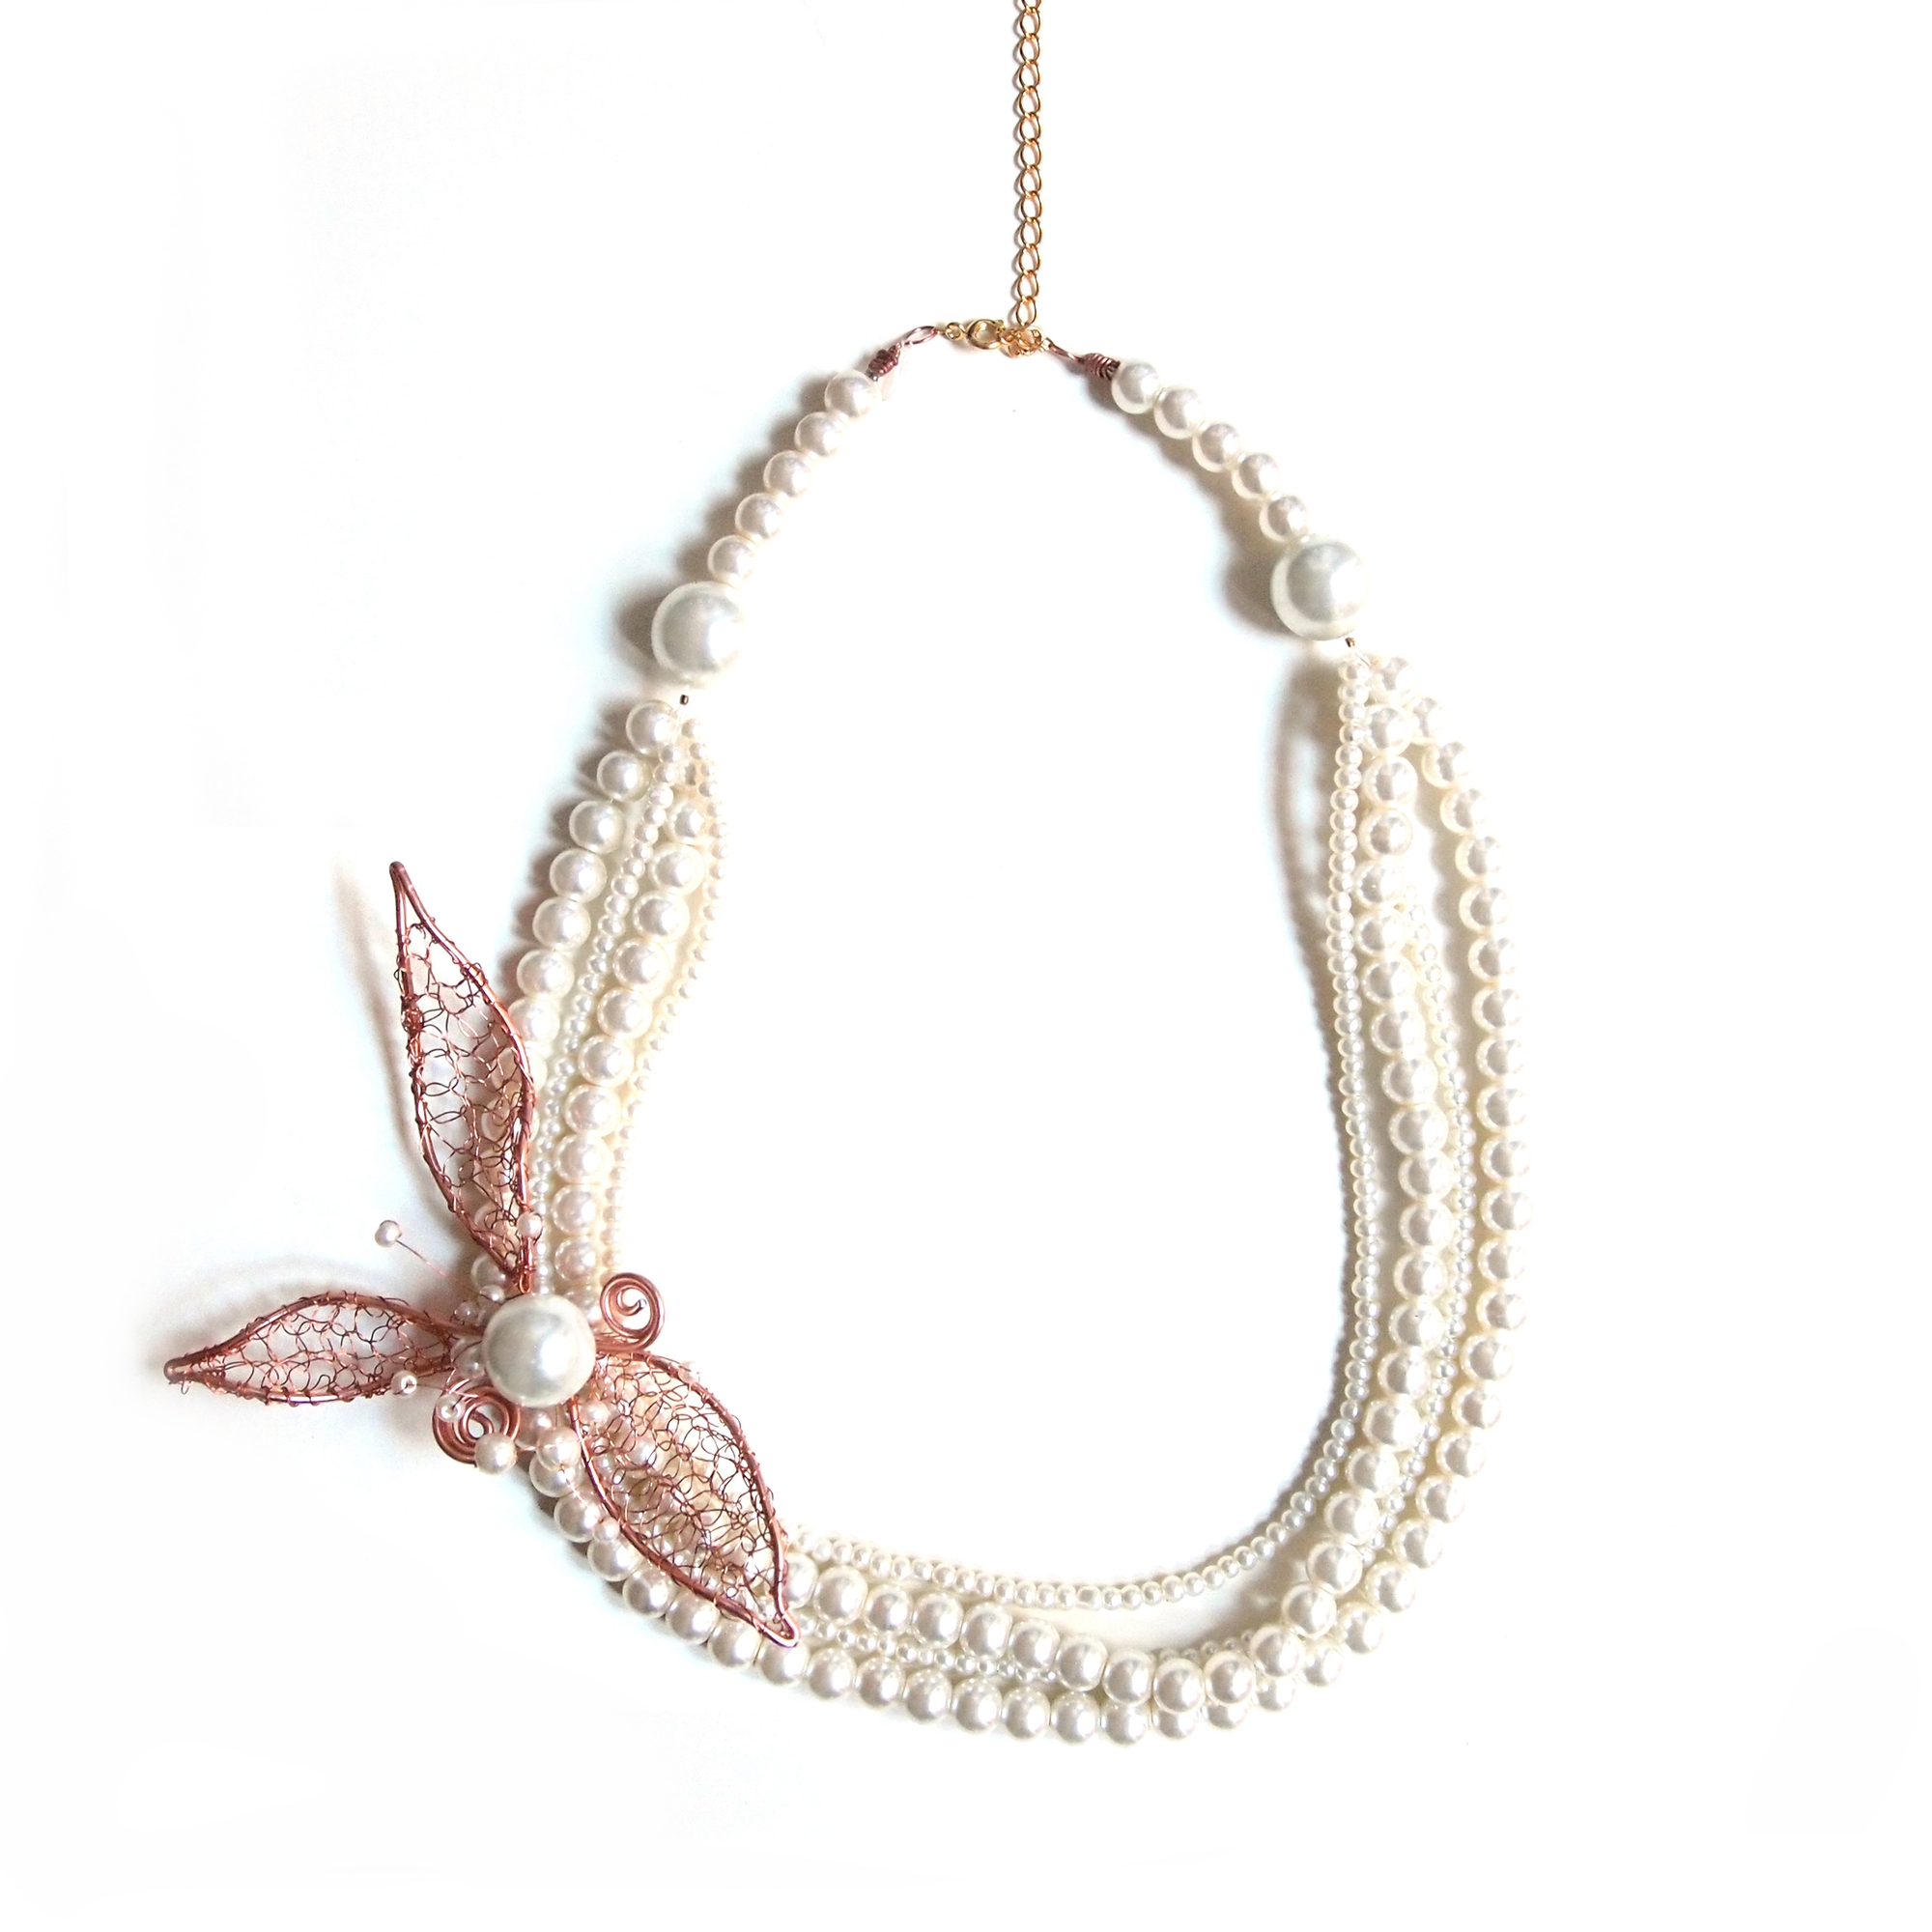 Khandacessories - Wire crochet multi-strand pearl necklace